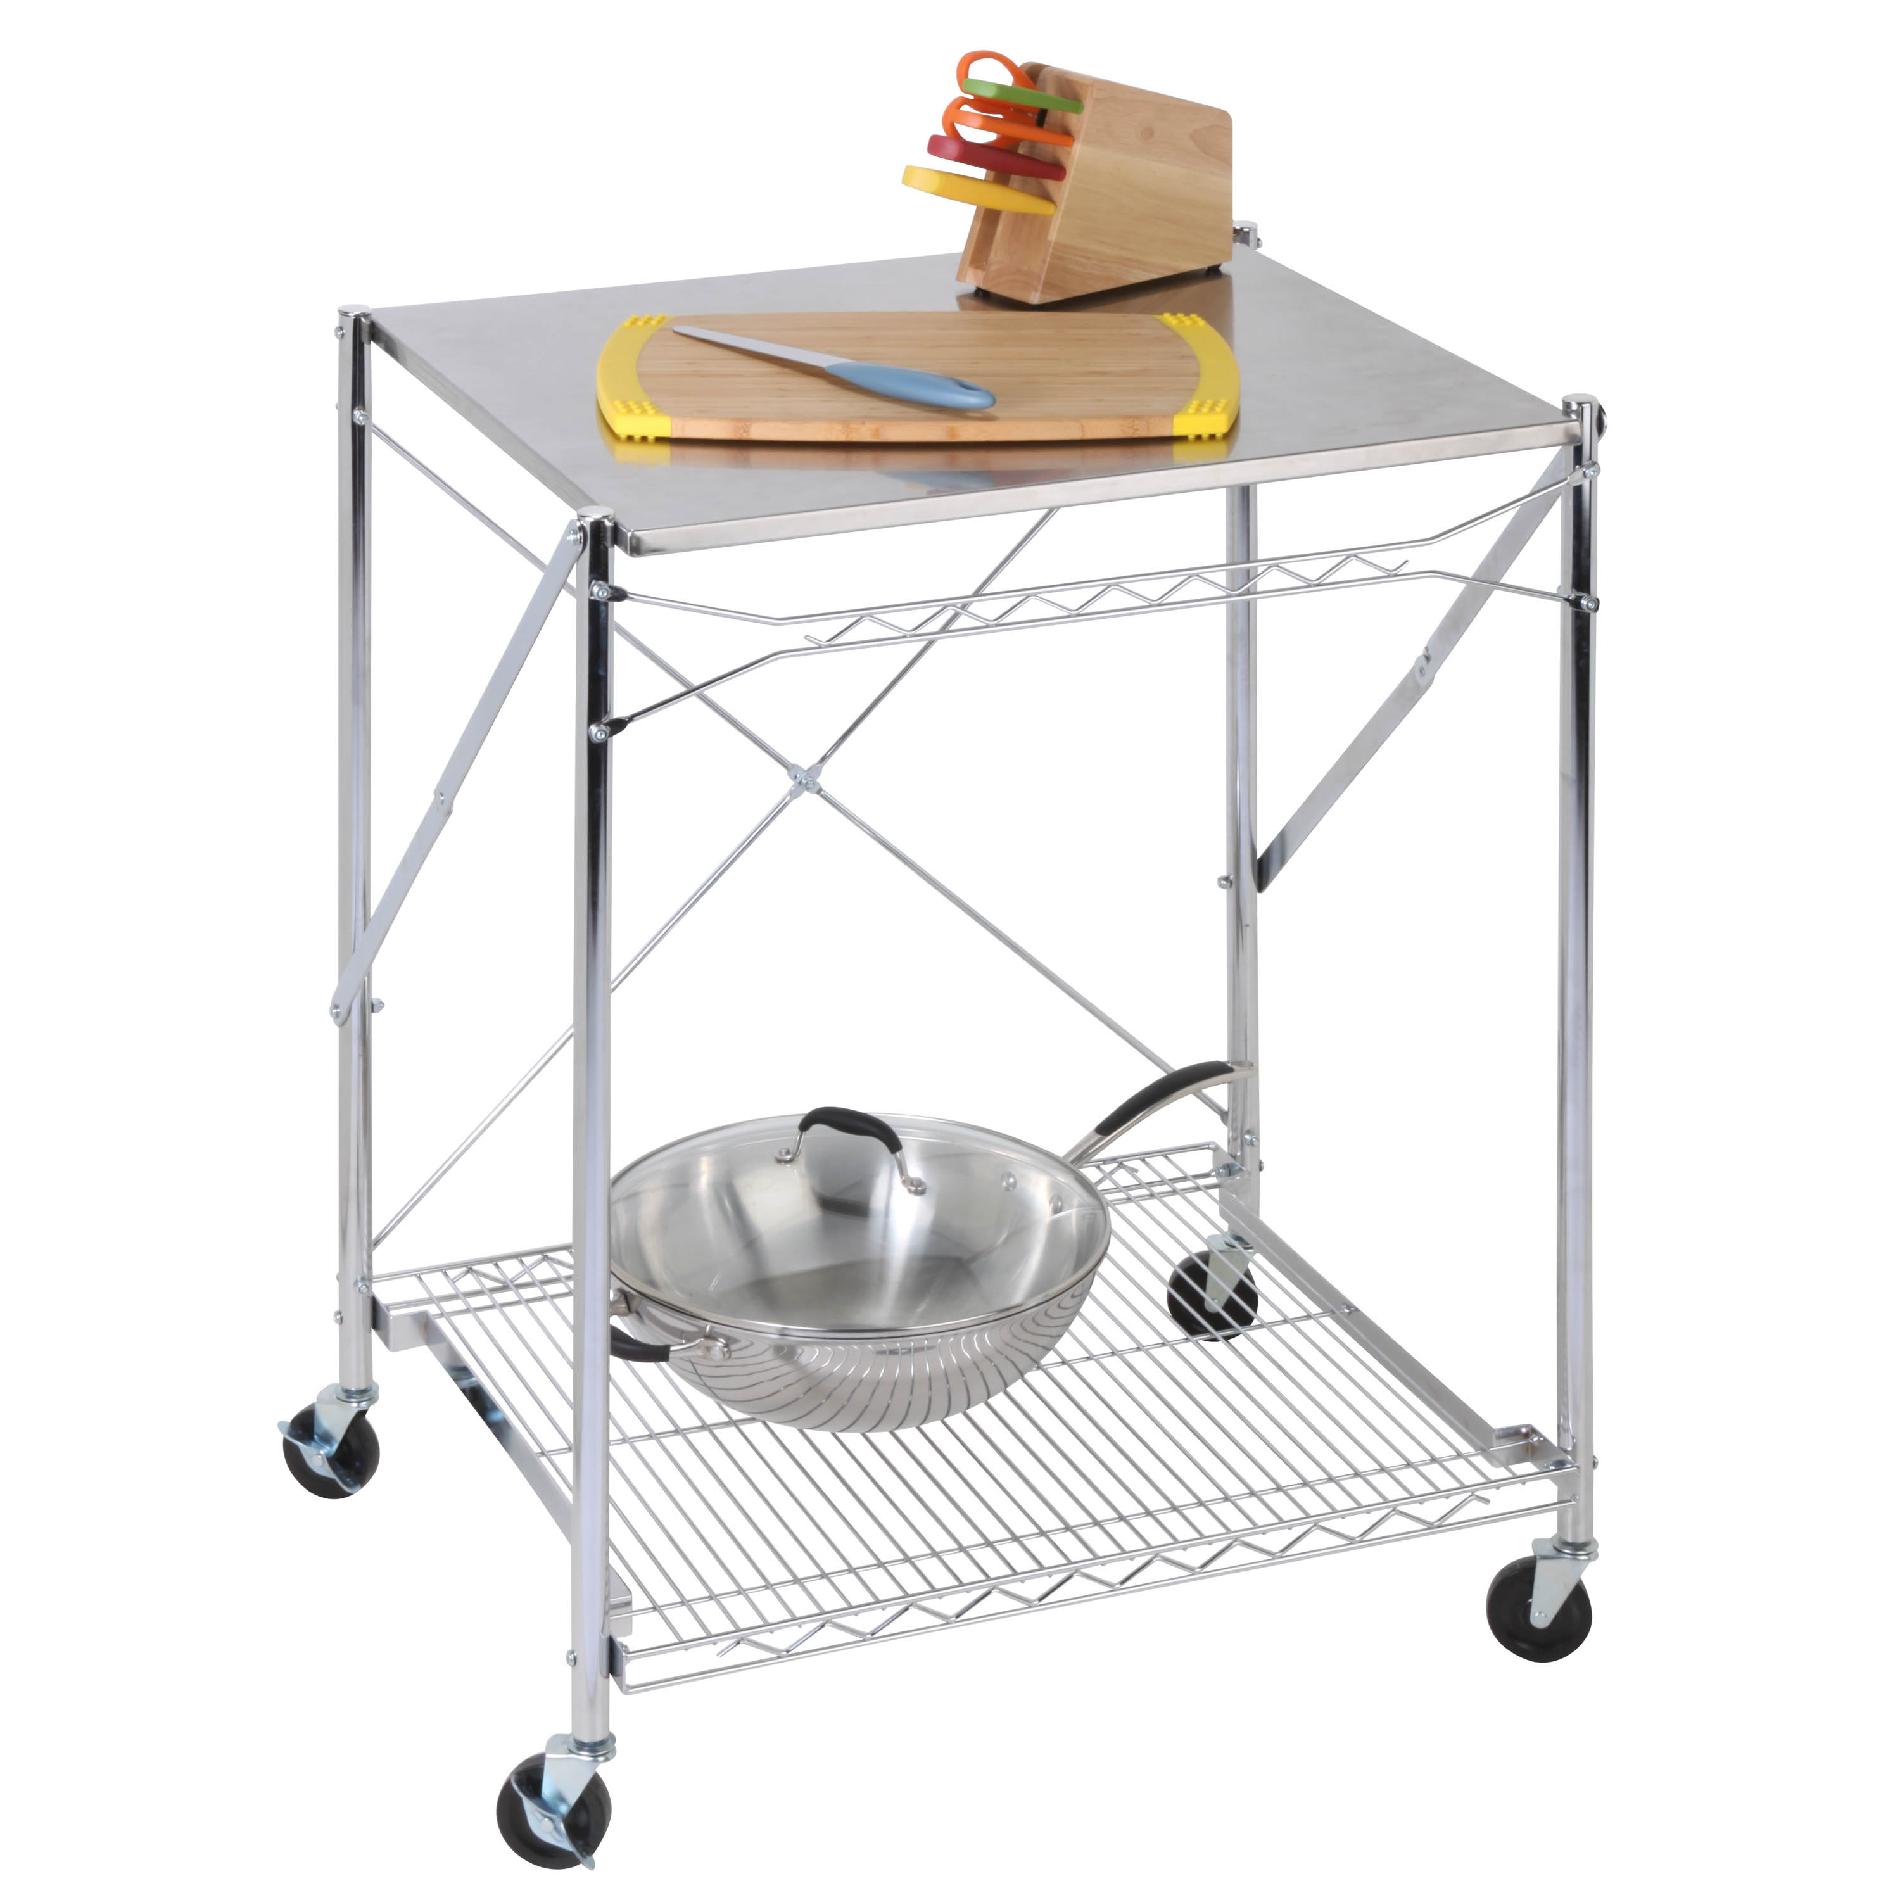 Honey Can Do Stainless Steel Folding Urban Work Table